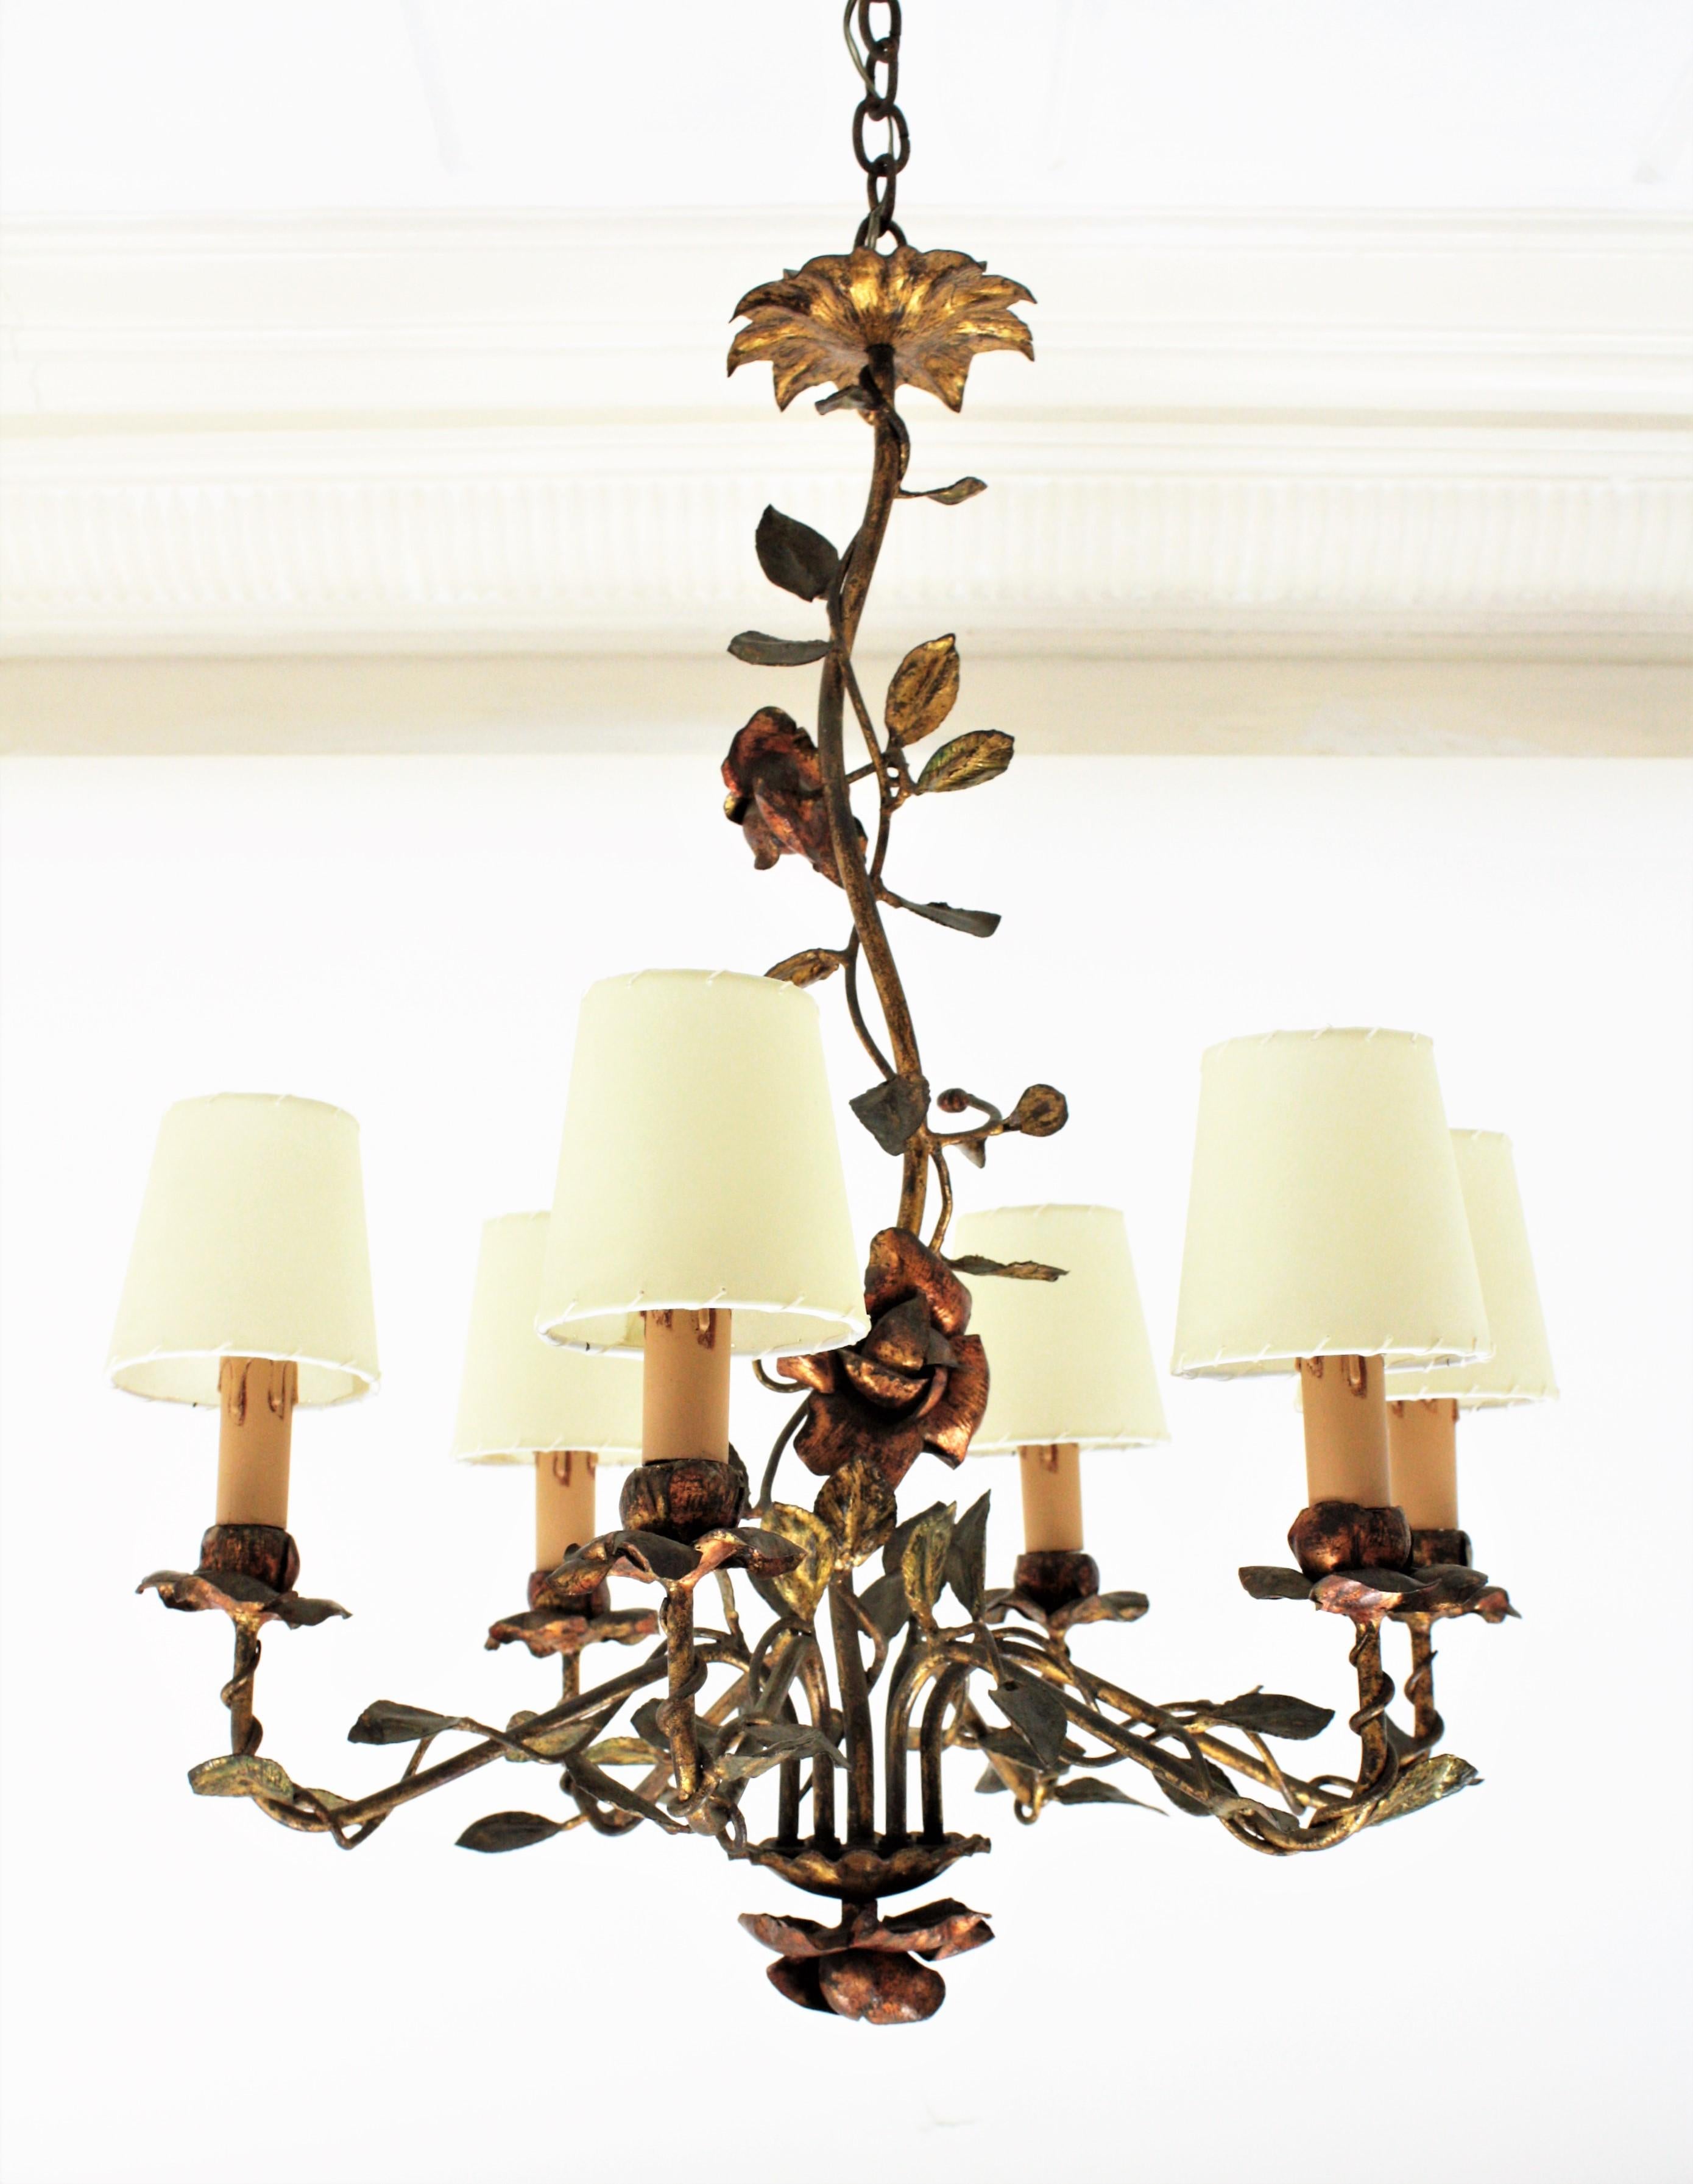 20th Century Spanish Floral Tole Chandelier in Gilt Iron, 1940s For Sale